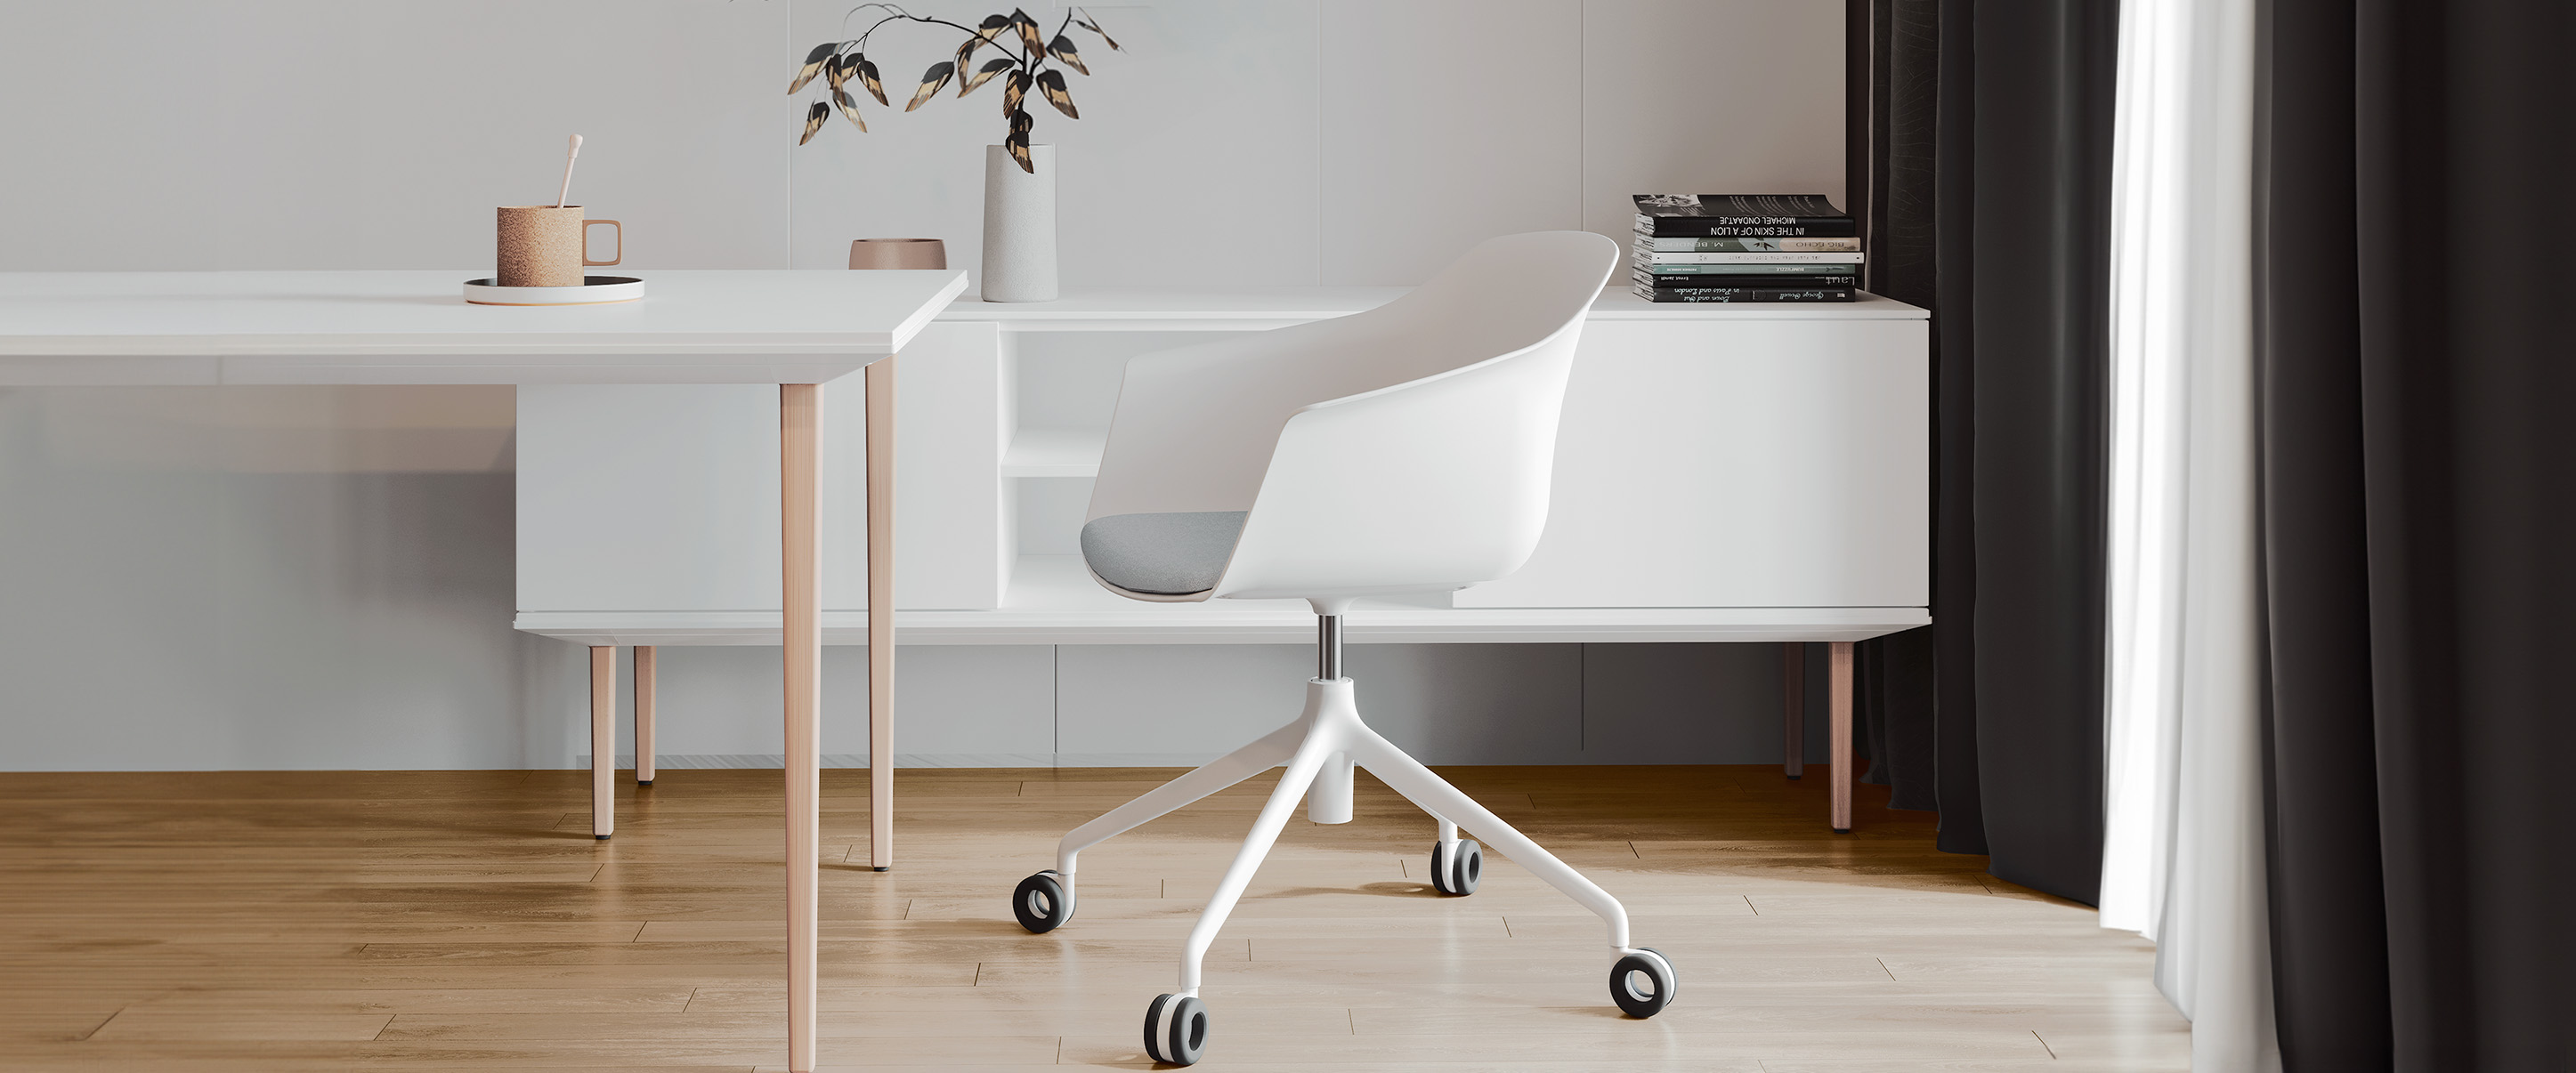 The image shows a modern, minimalist office setting featuring a white Noom 60 chair designed by Alegre Design for Actiu. The chair has a curved, bucket-style seat with integrated armrests and is mounted on a white, wheeled base for mobility. The scene includes a white desk, a sideboard, and some decorative items like a cup, a vase with branches, and stacked books. The overall design is sleek and contemporary, ideal for a clean and organized workspace.